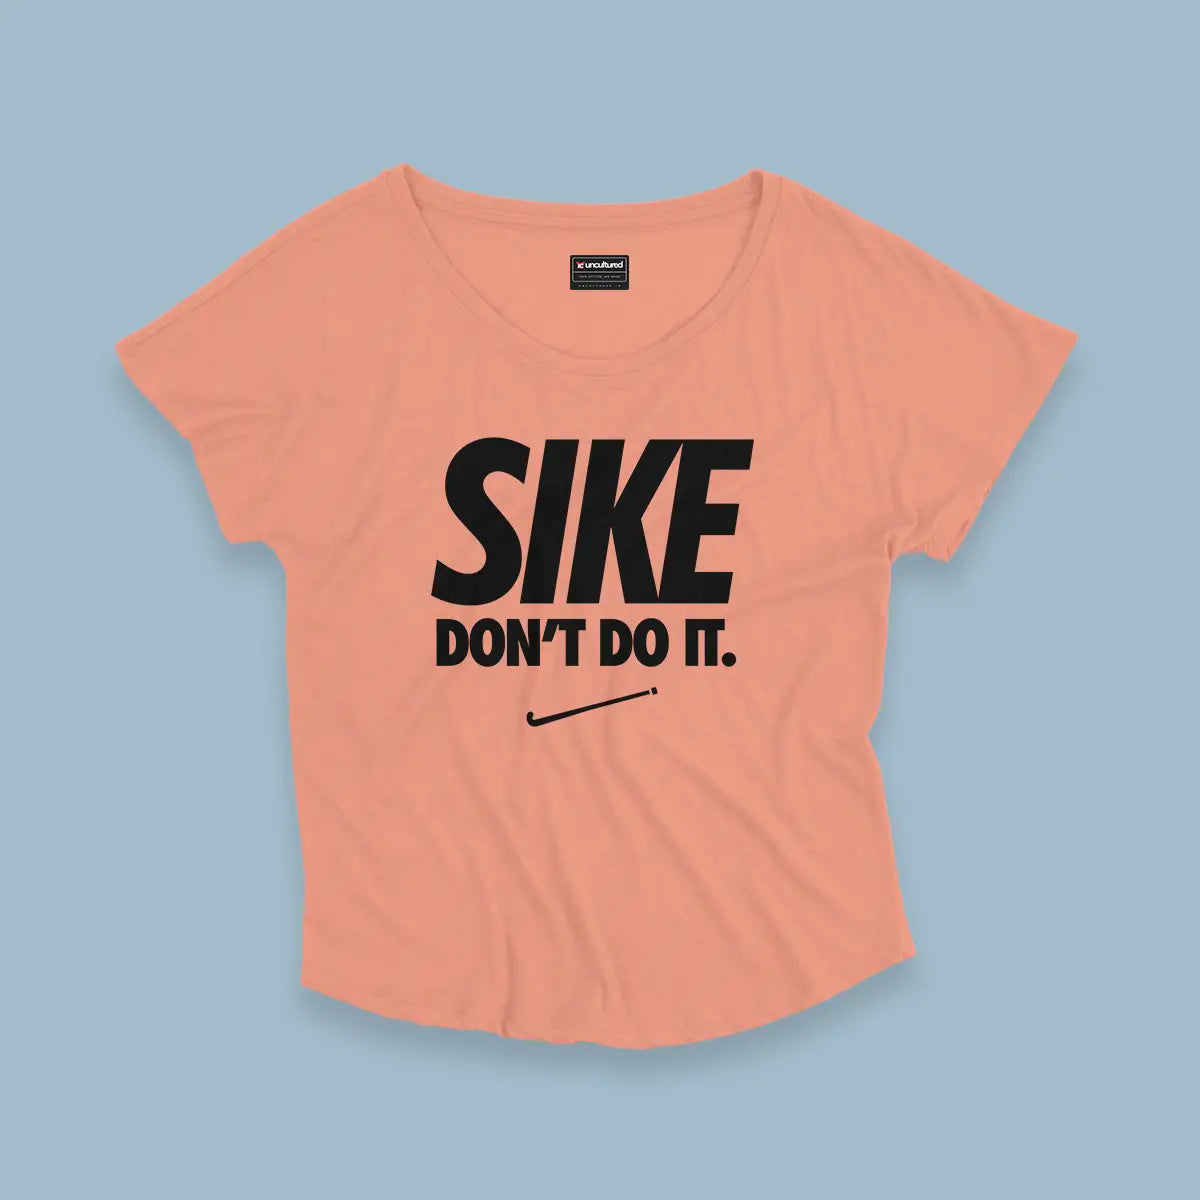 Sike don't do it - Croptop